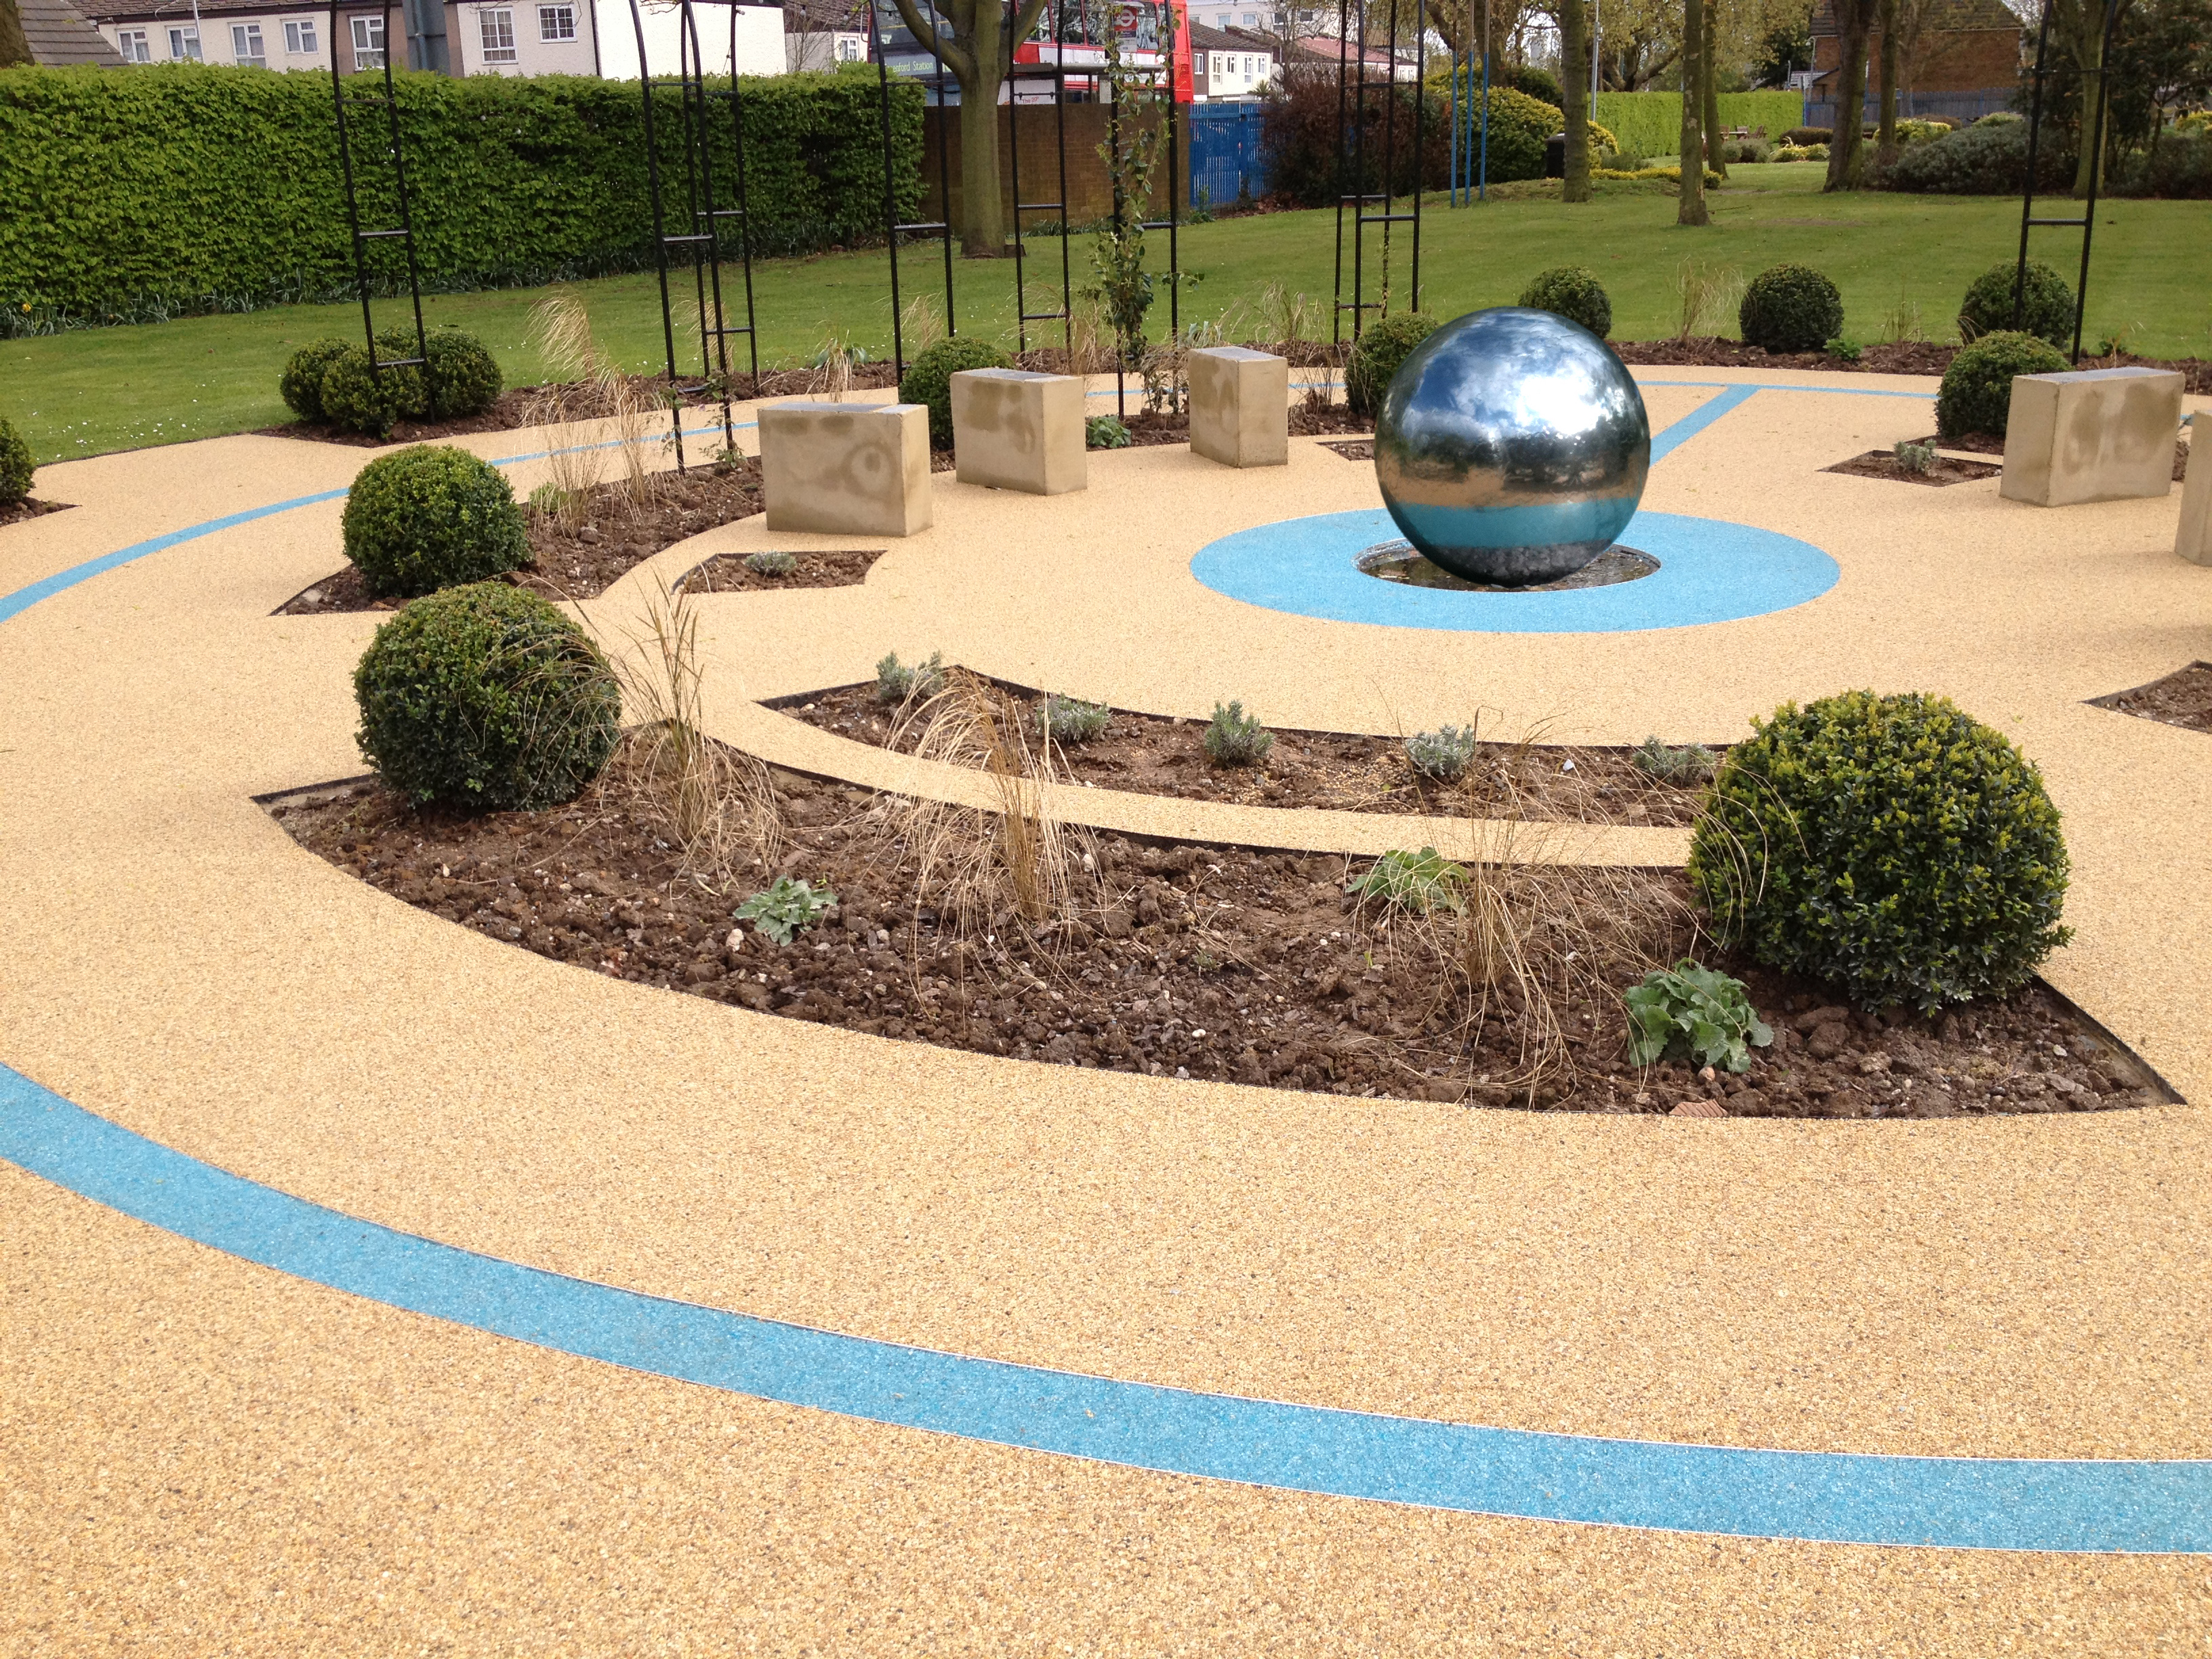 Clearstone® resin bound Circle of Life garden at Cranford Community College